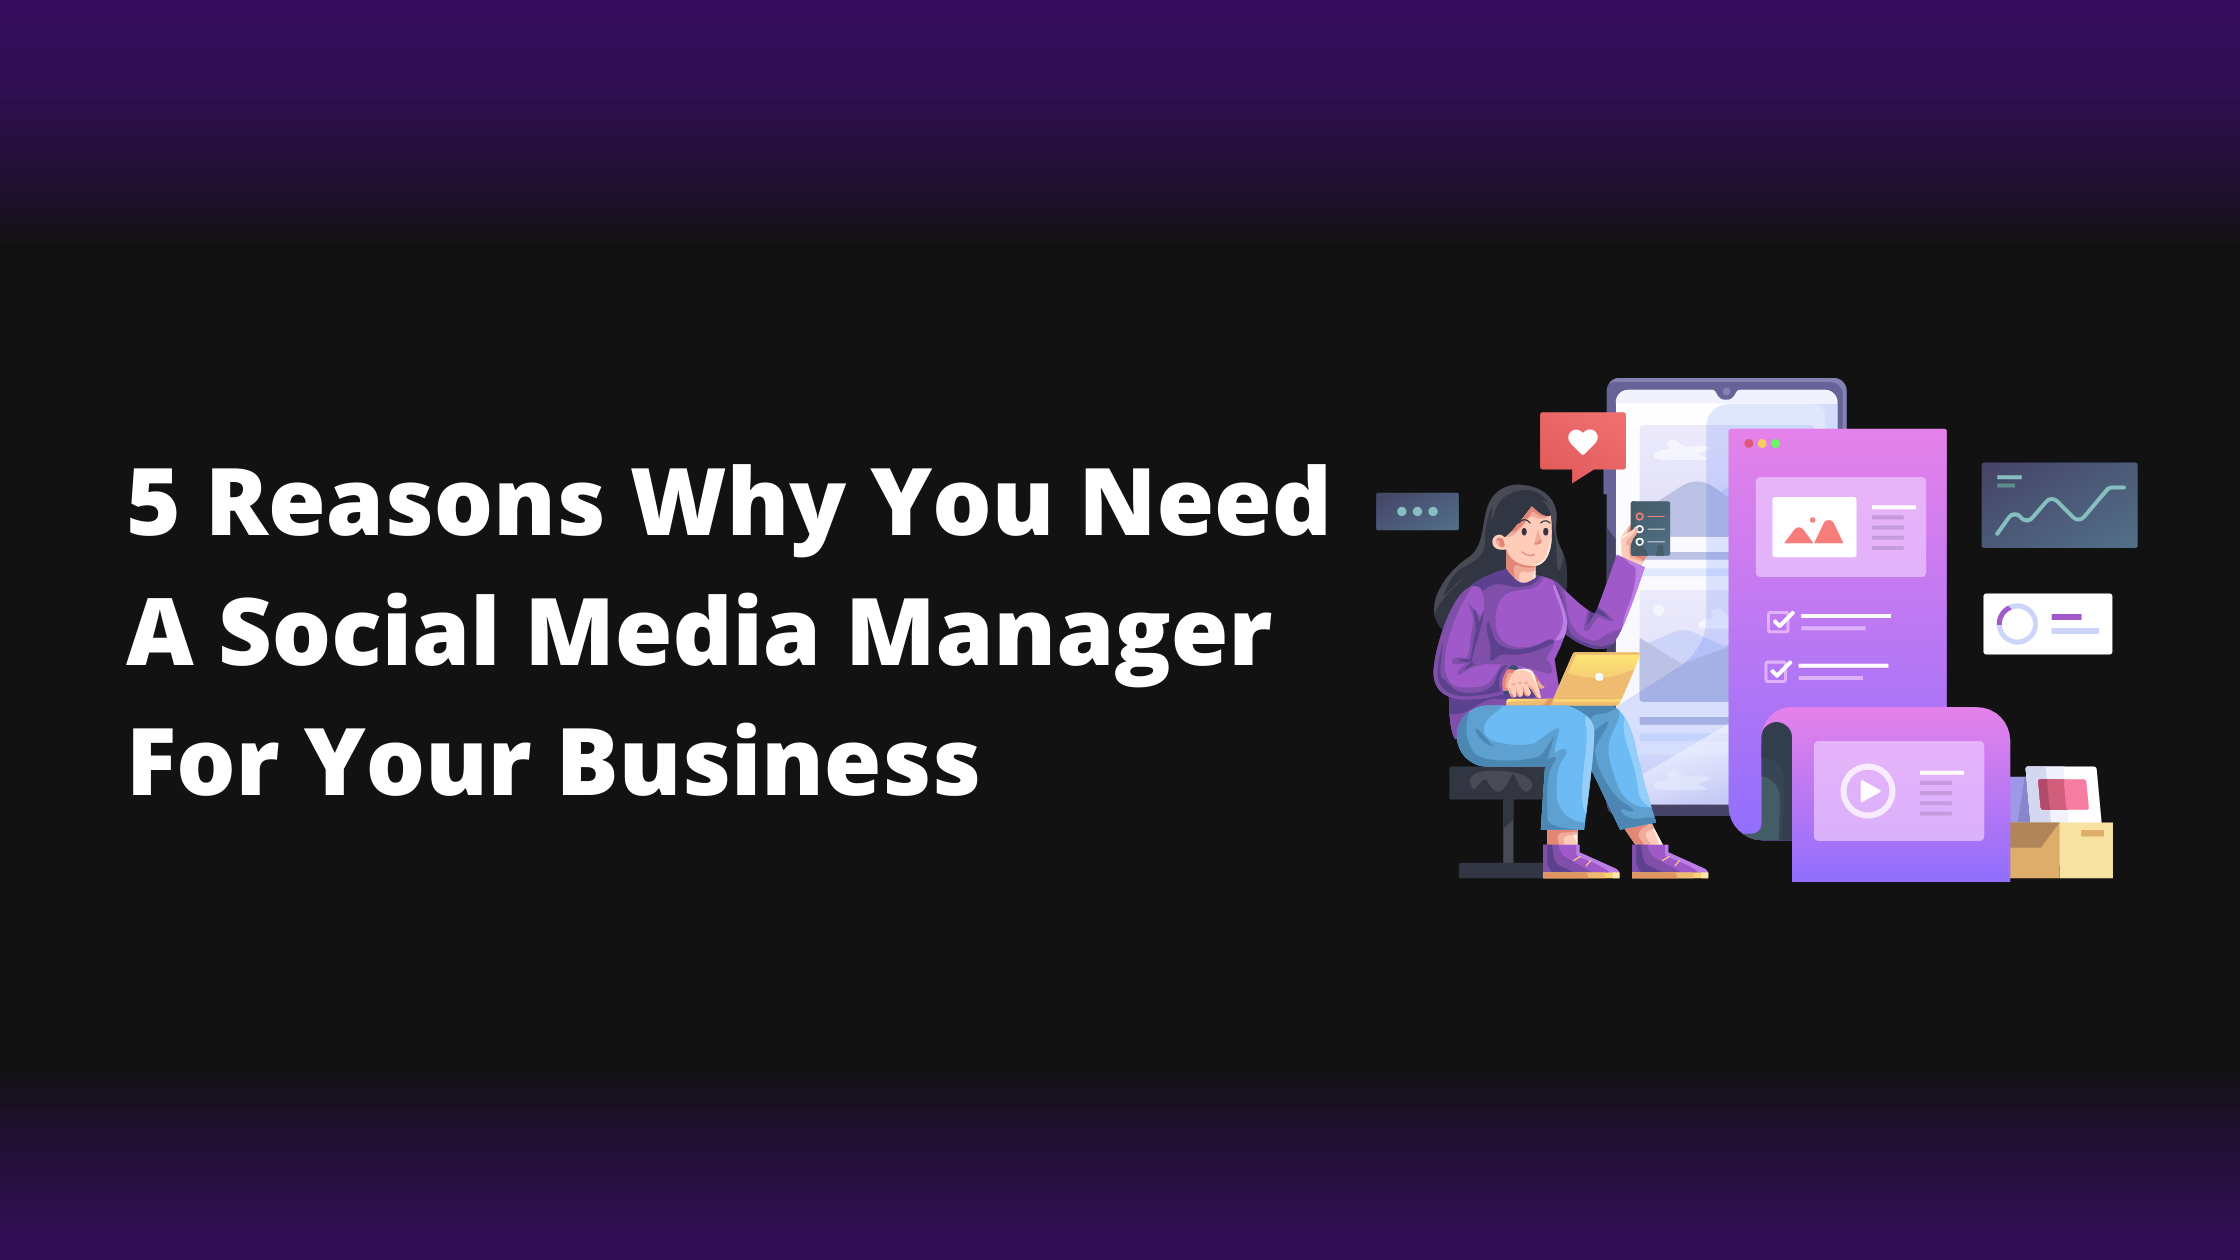 5 reasons why you need a social media manager for your business